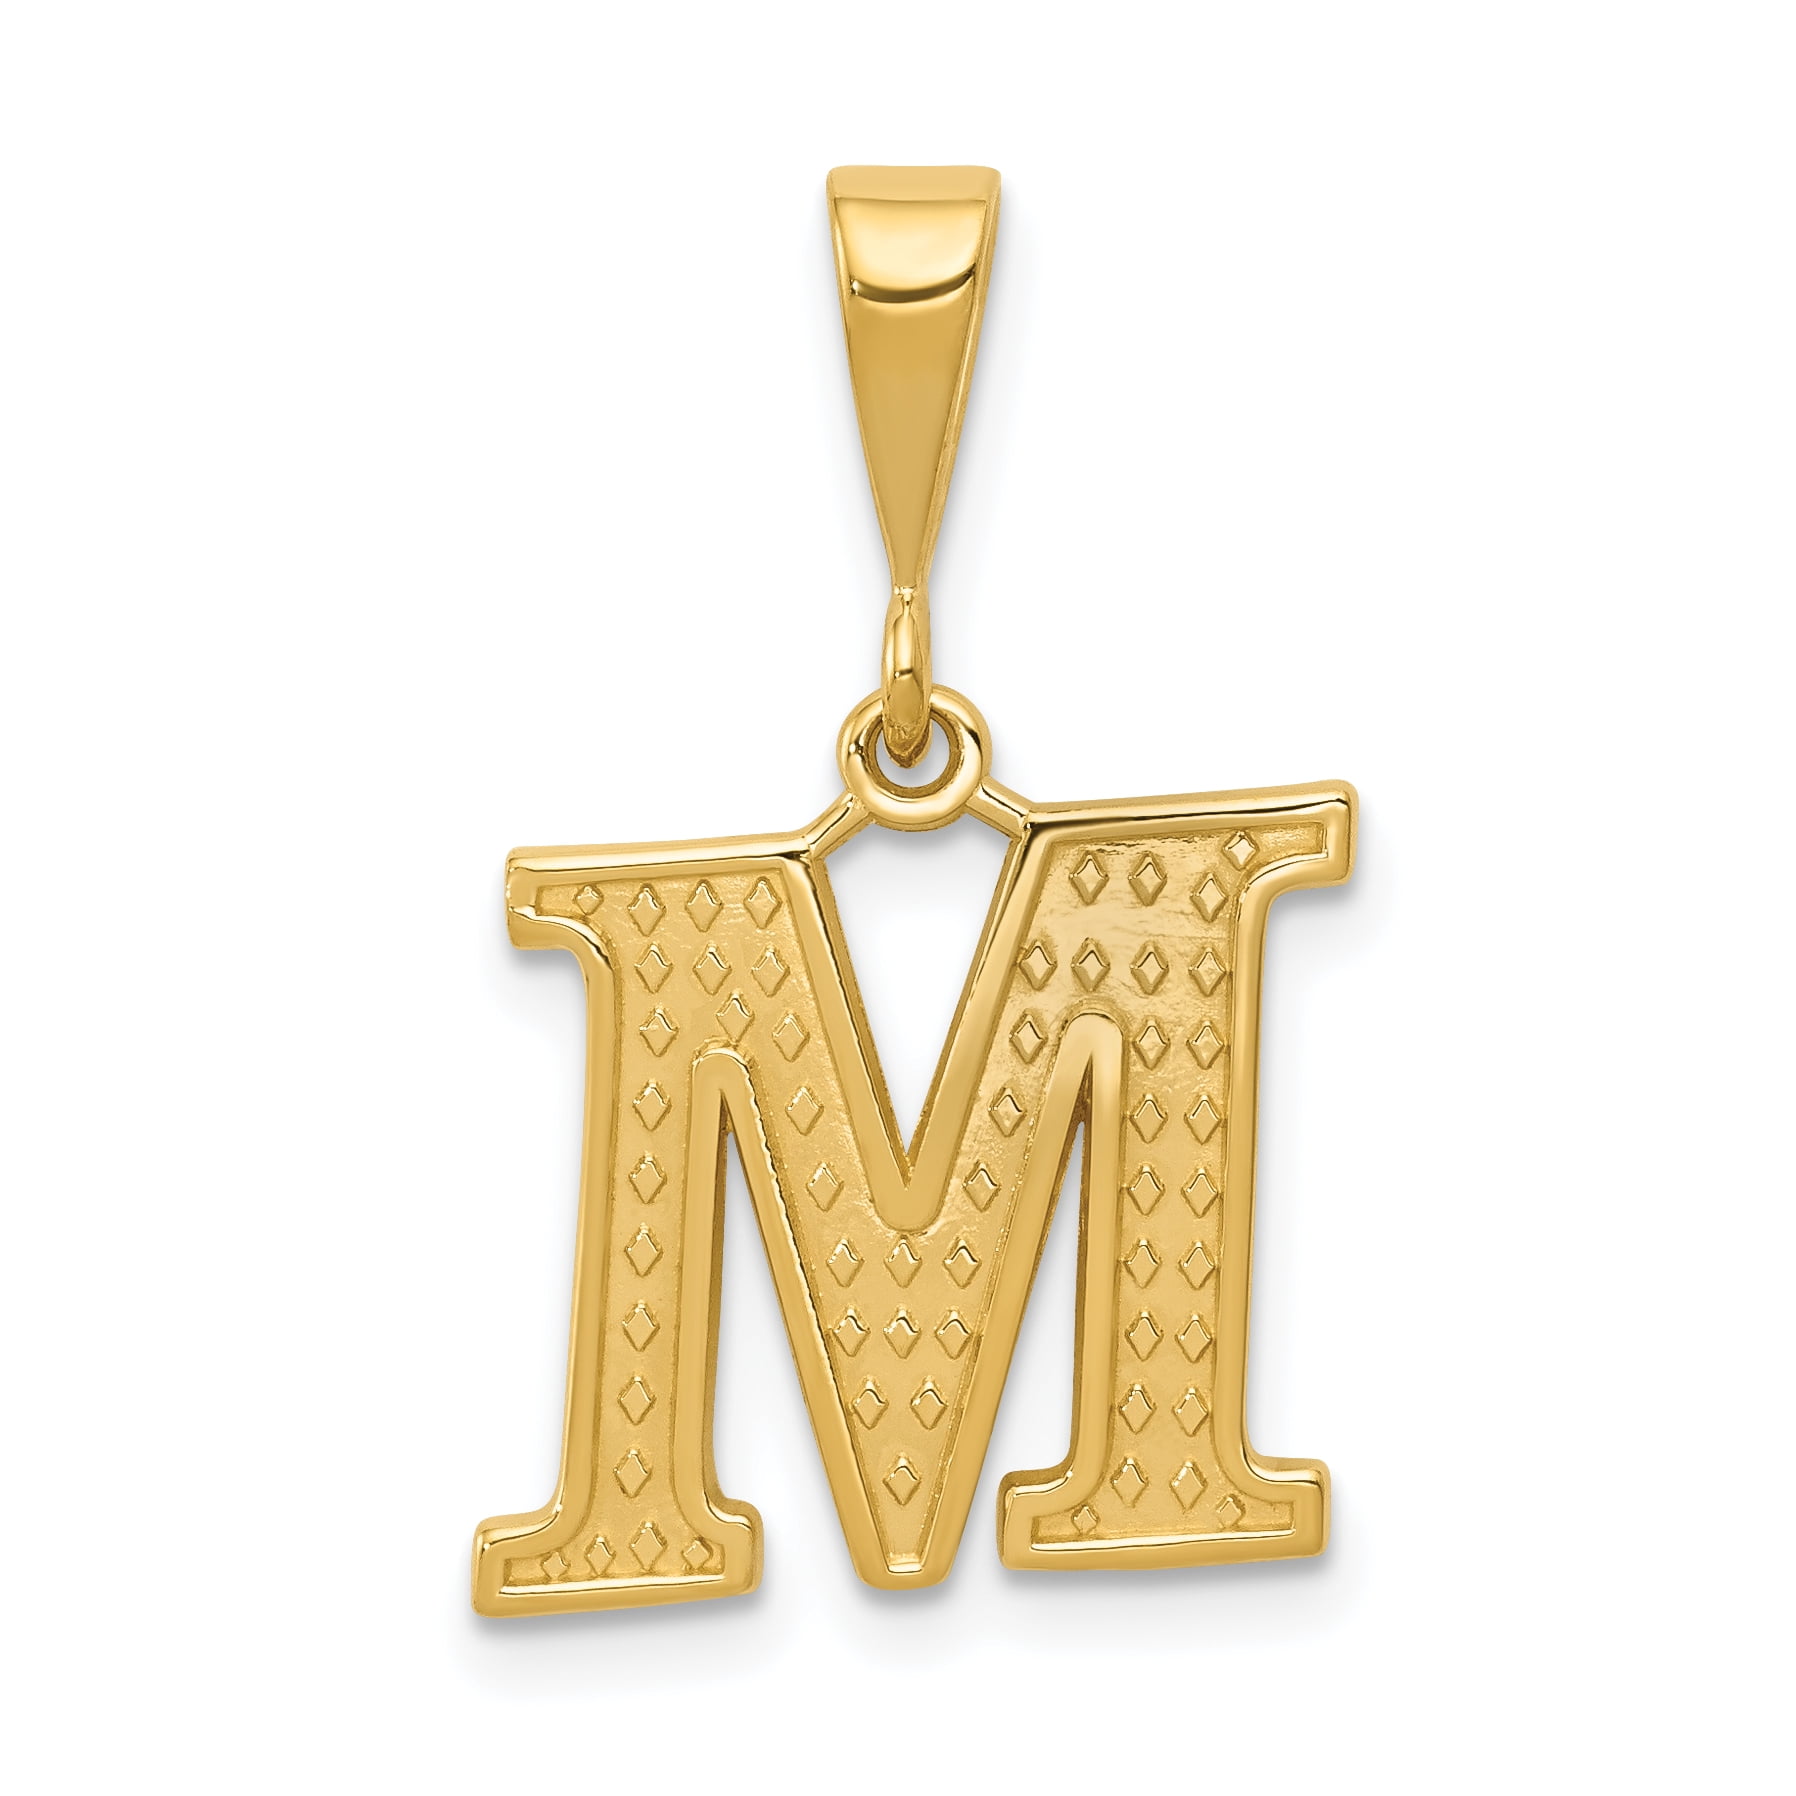 14ky Casted Initial M Charm 